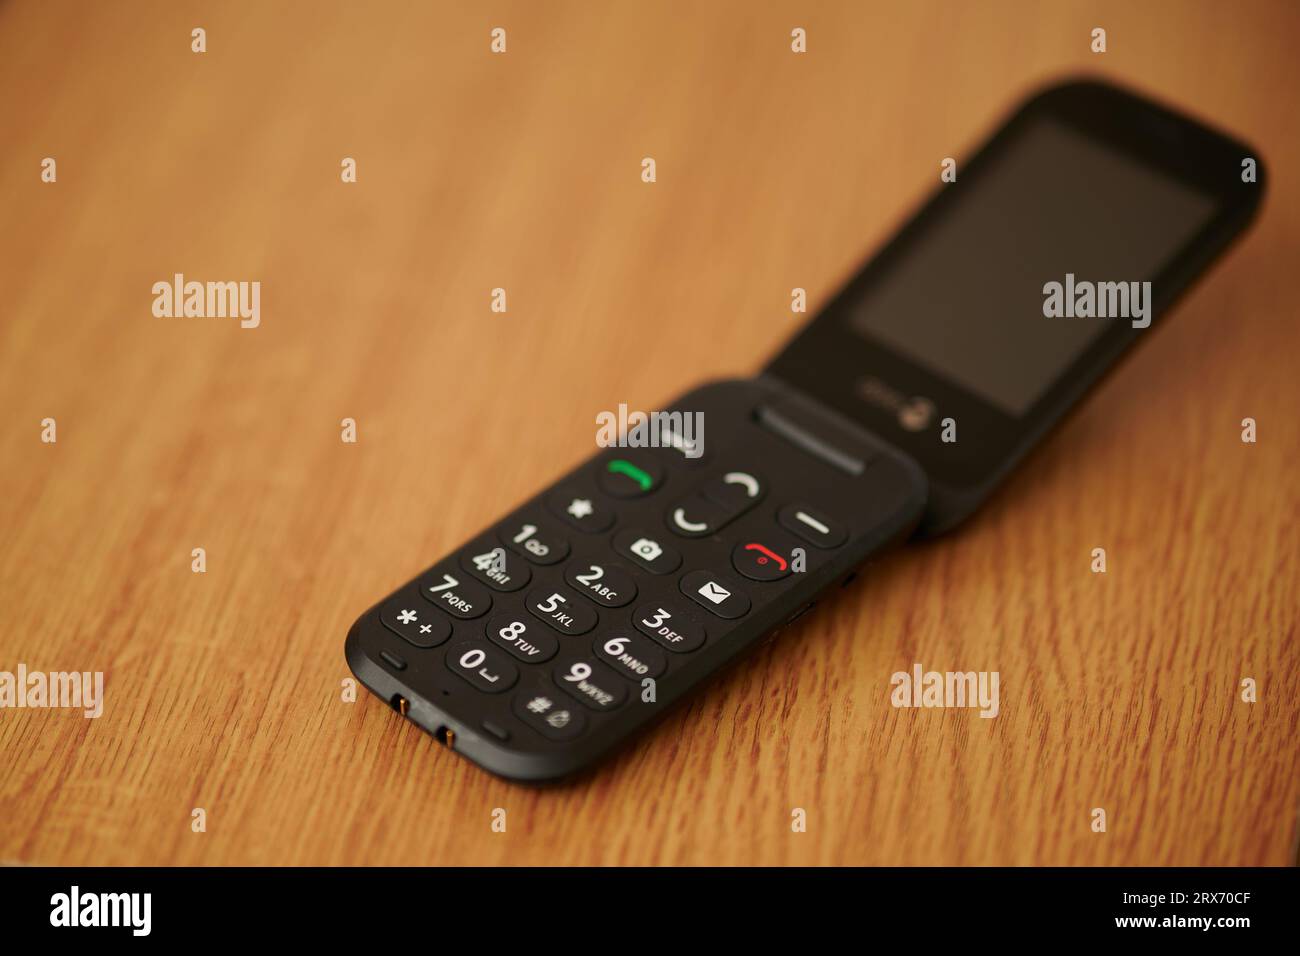 16 Sep 2023 - England  UK : Old style dumb mobile phone clam phone on wooden table Stock Photo